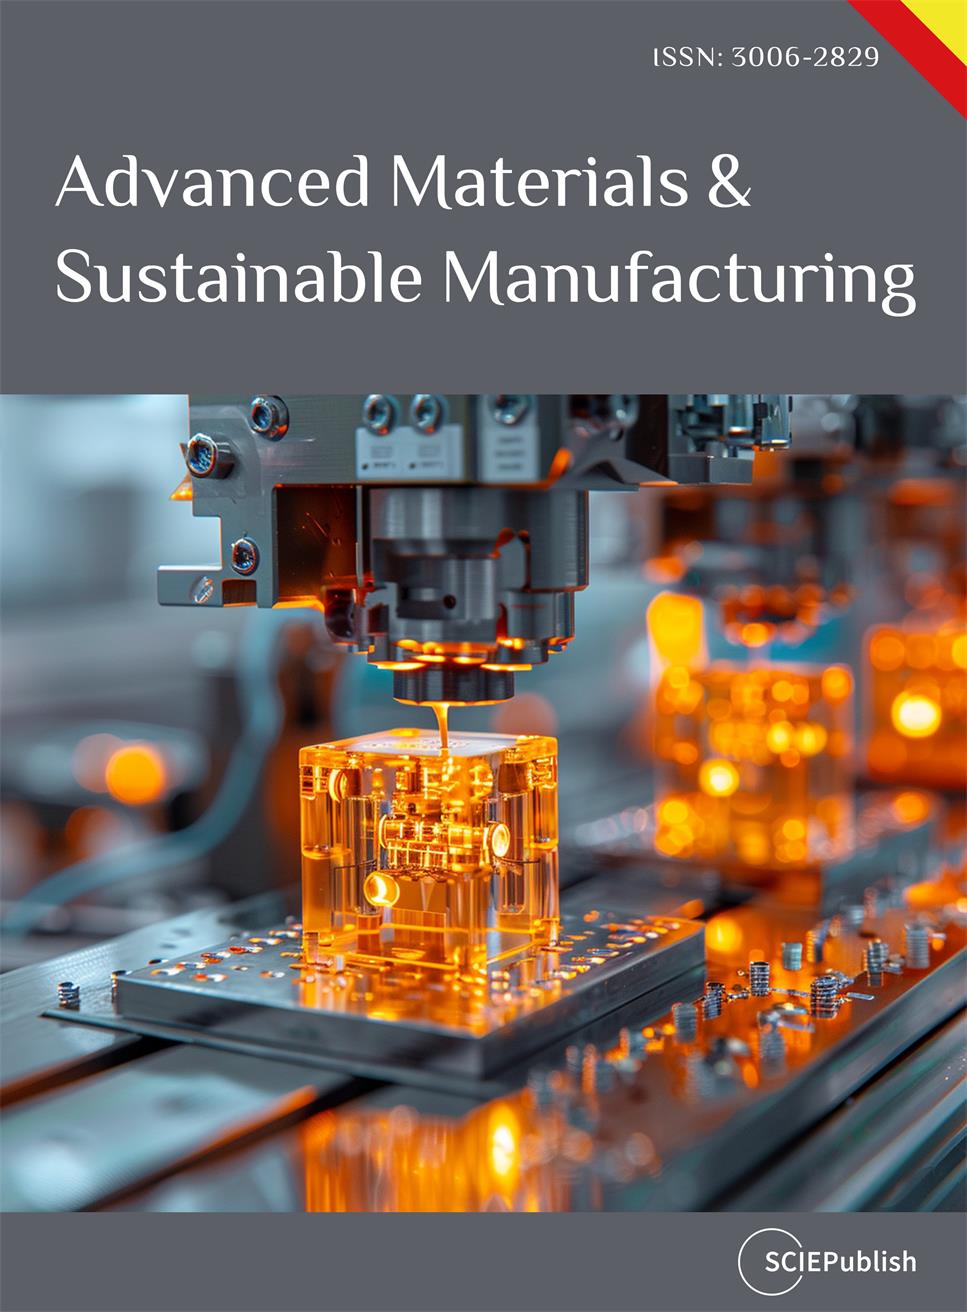 Advanced Materials & Sustainable Manufacturing-logo